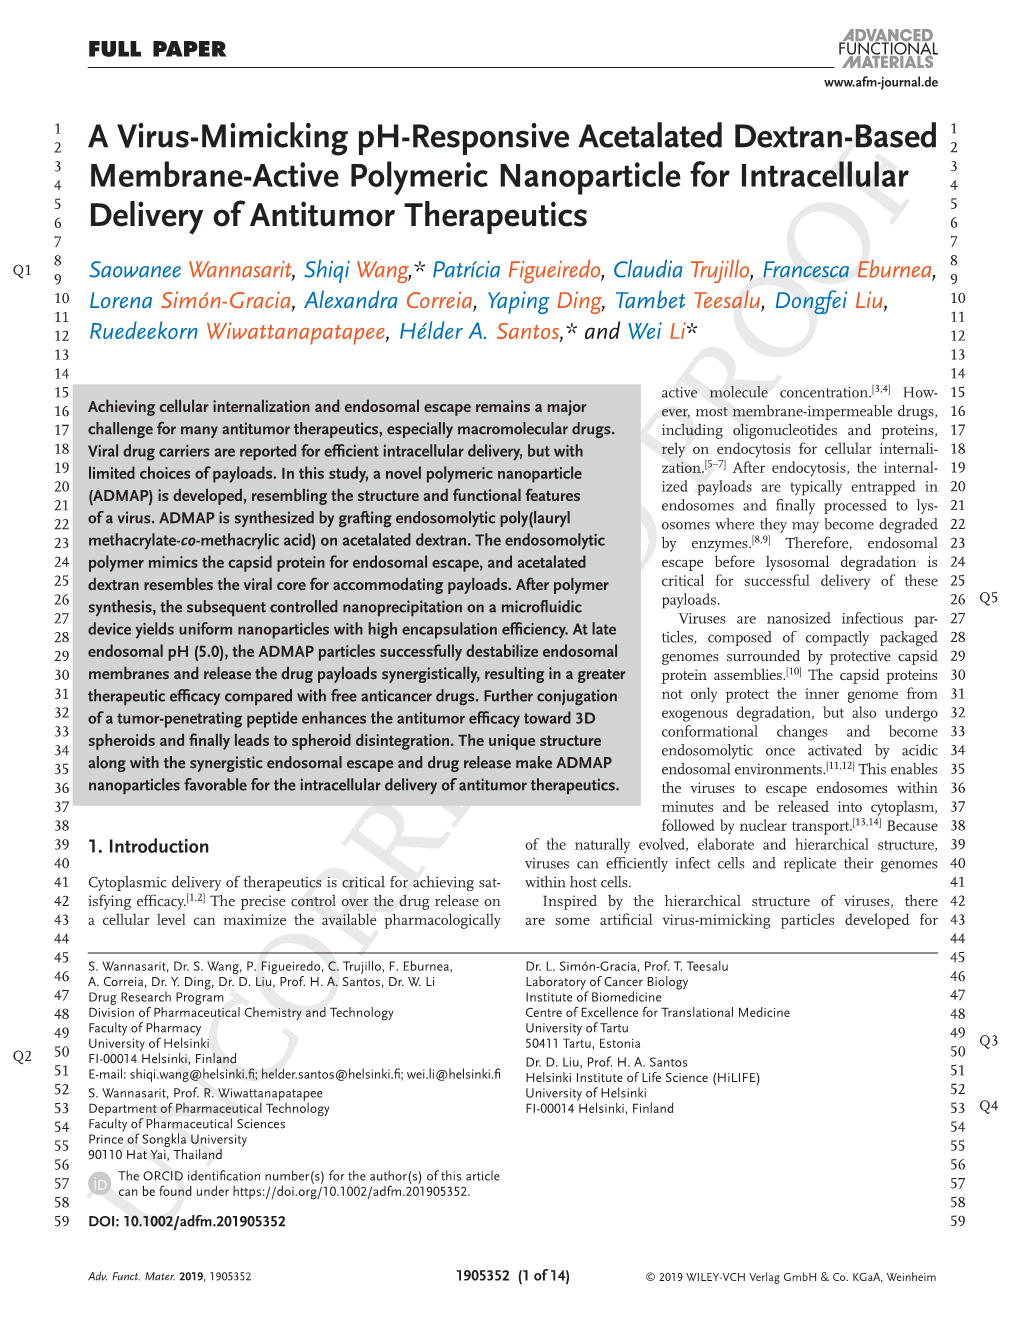 A Virus-Mimicking Ph-Responsive Acetalated Dextran-Based Membrane-Active Polymeric Nanoparticle for Intracellular Delivery of An